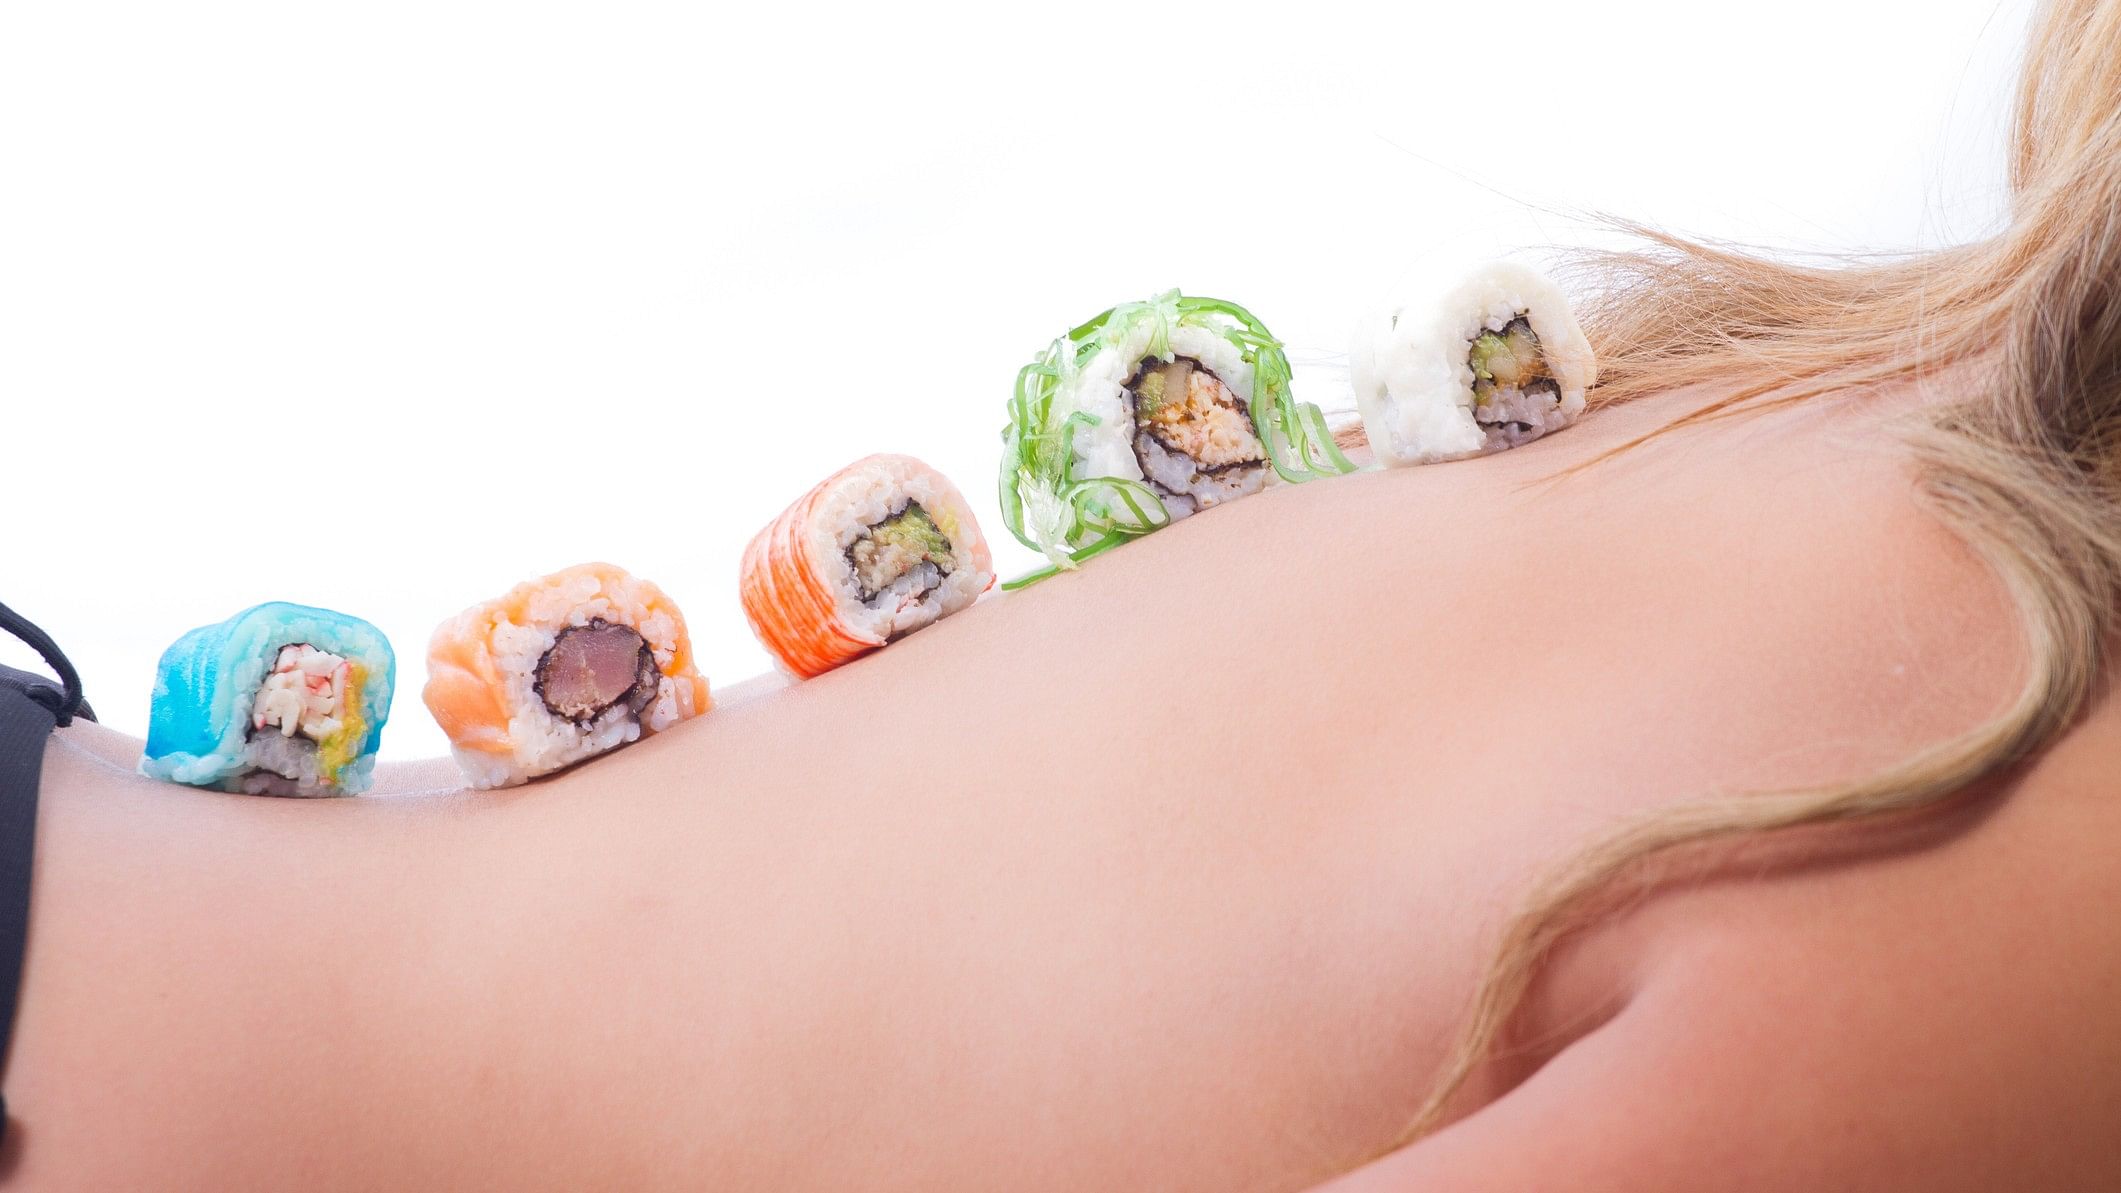 <div class="paragraphs"><p>Representative image showing sushi rolls on a woman's body.</p></div>